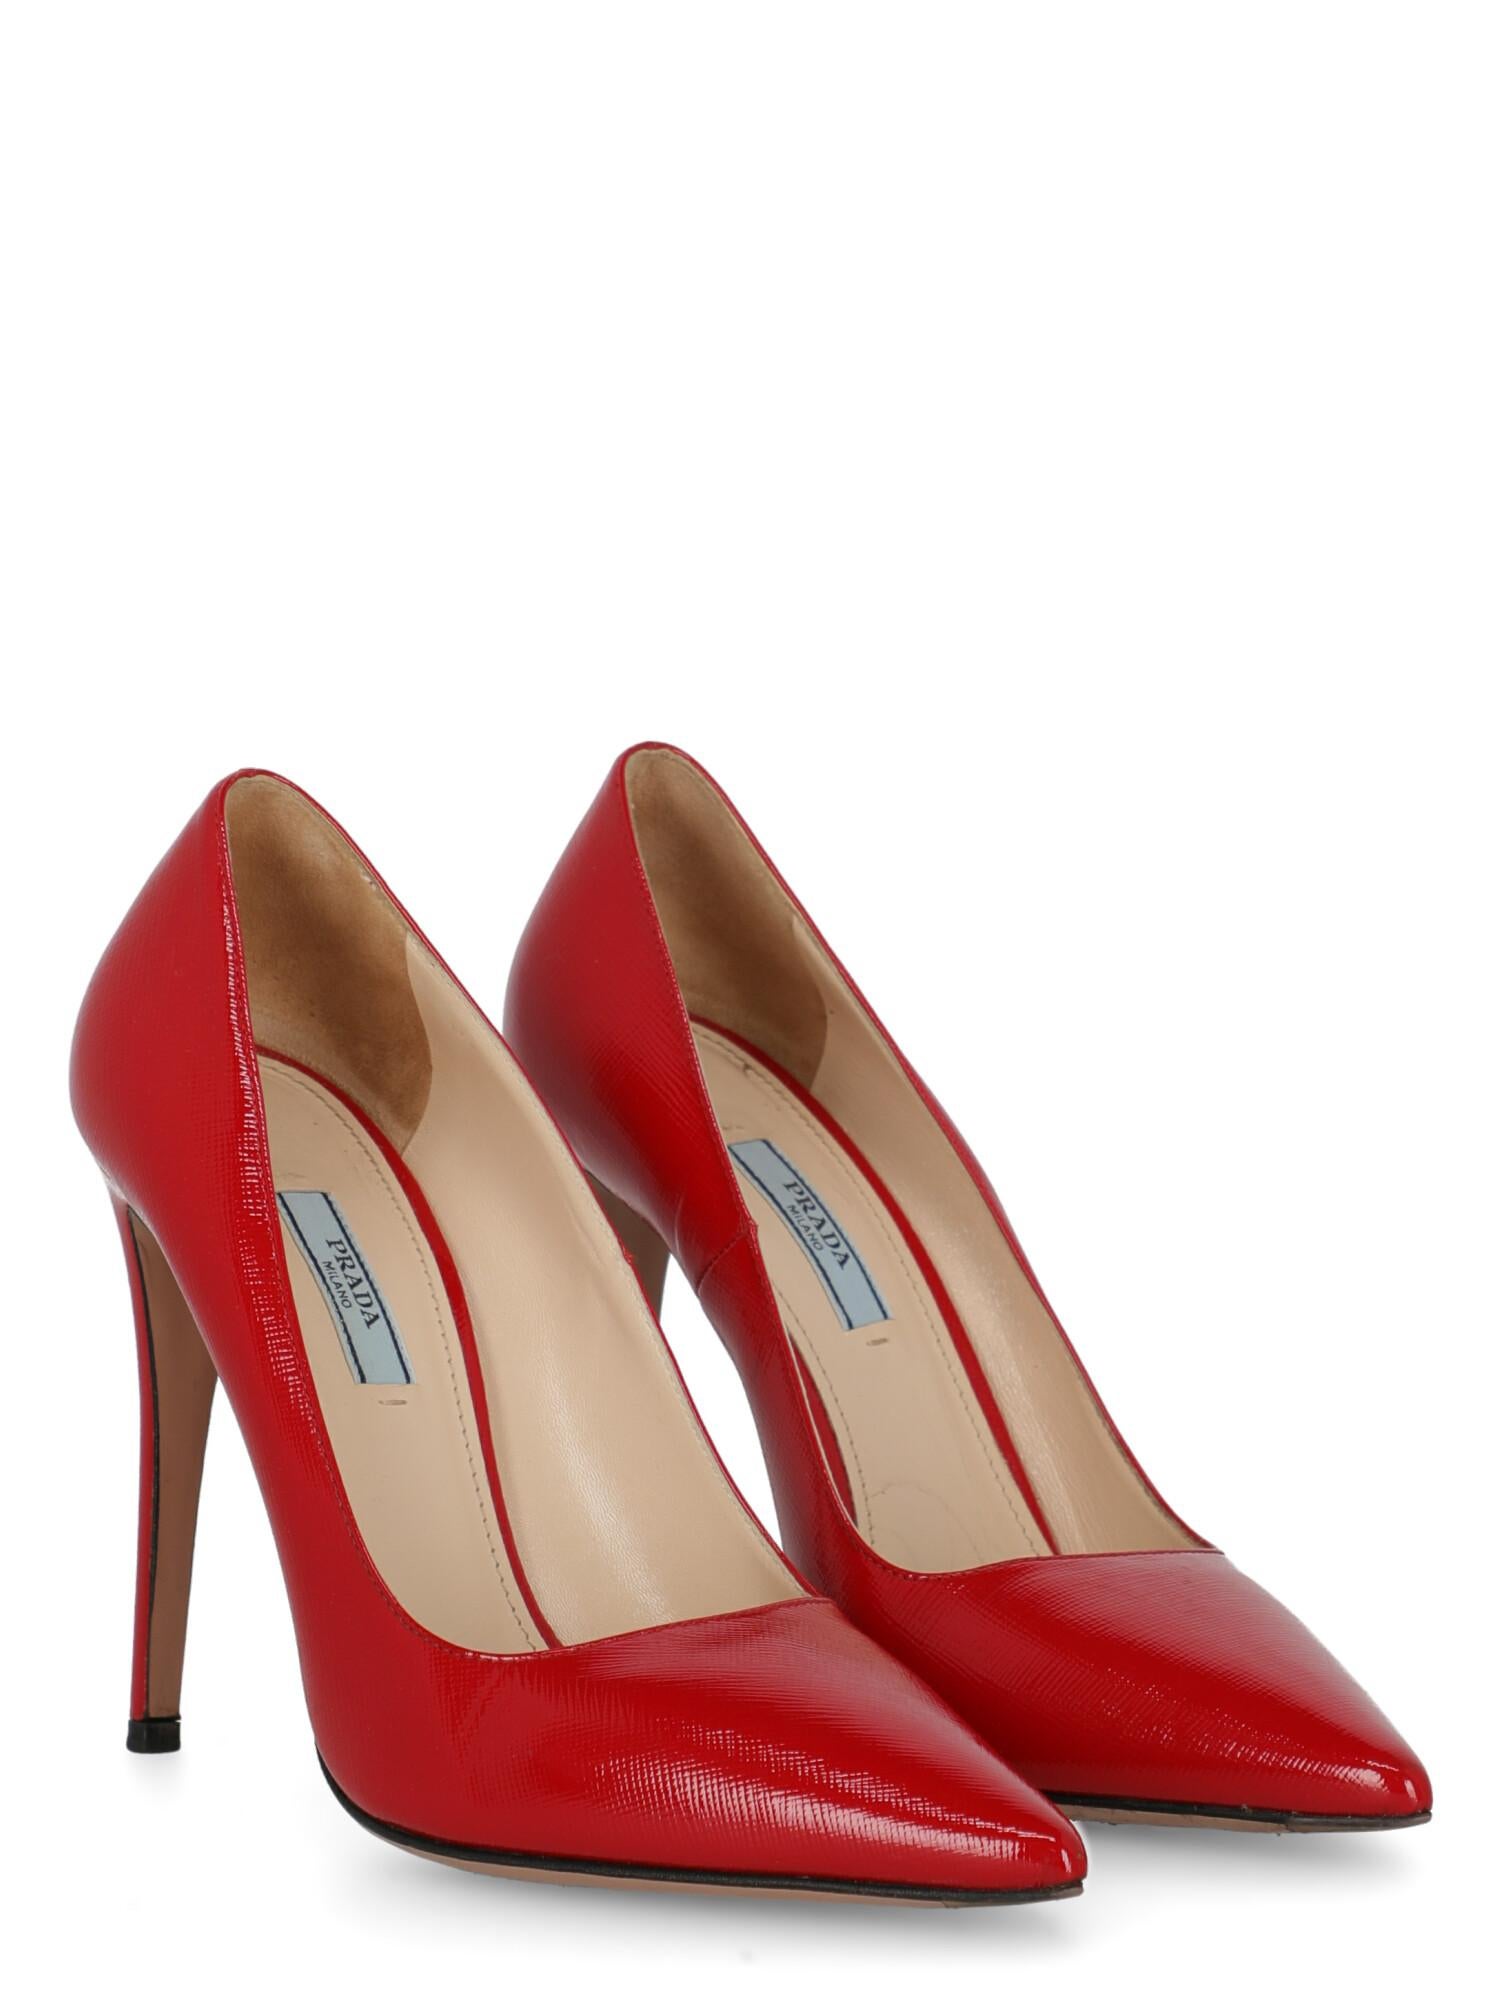 Product Description: Pumps, leather, solid color, pointed toe, branded insole, tapered heel, high heel

Includes:
- Dust bag

Product Condition: Very Good
Sole: visible signs of use. Upper: slightly visible stains. Insole: generic residues, visible